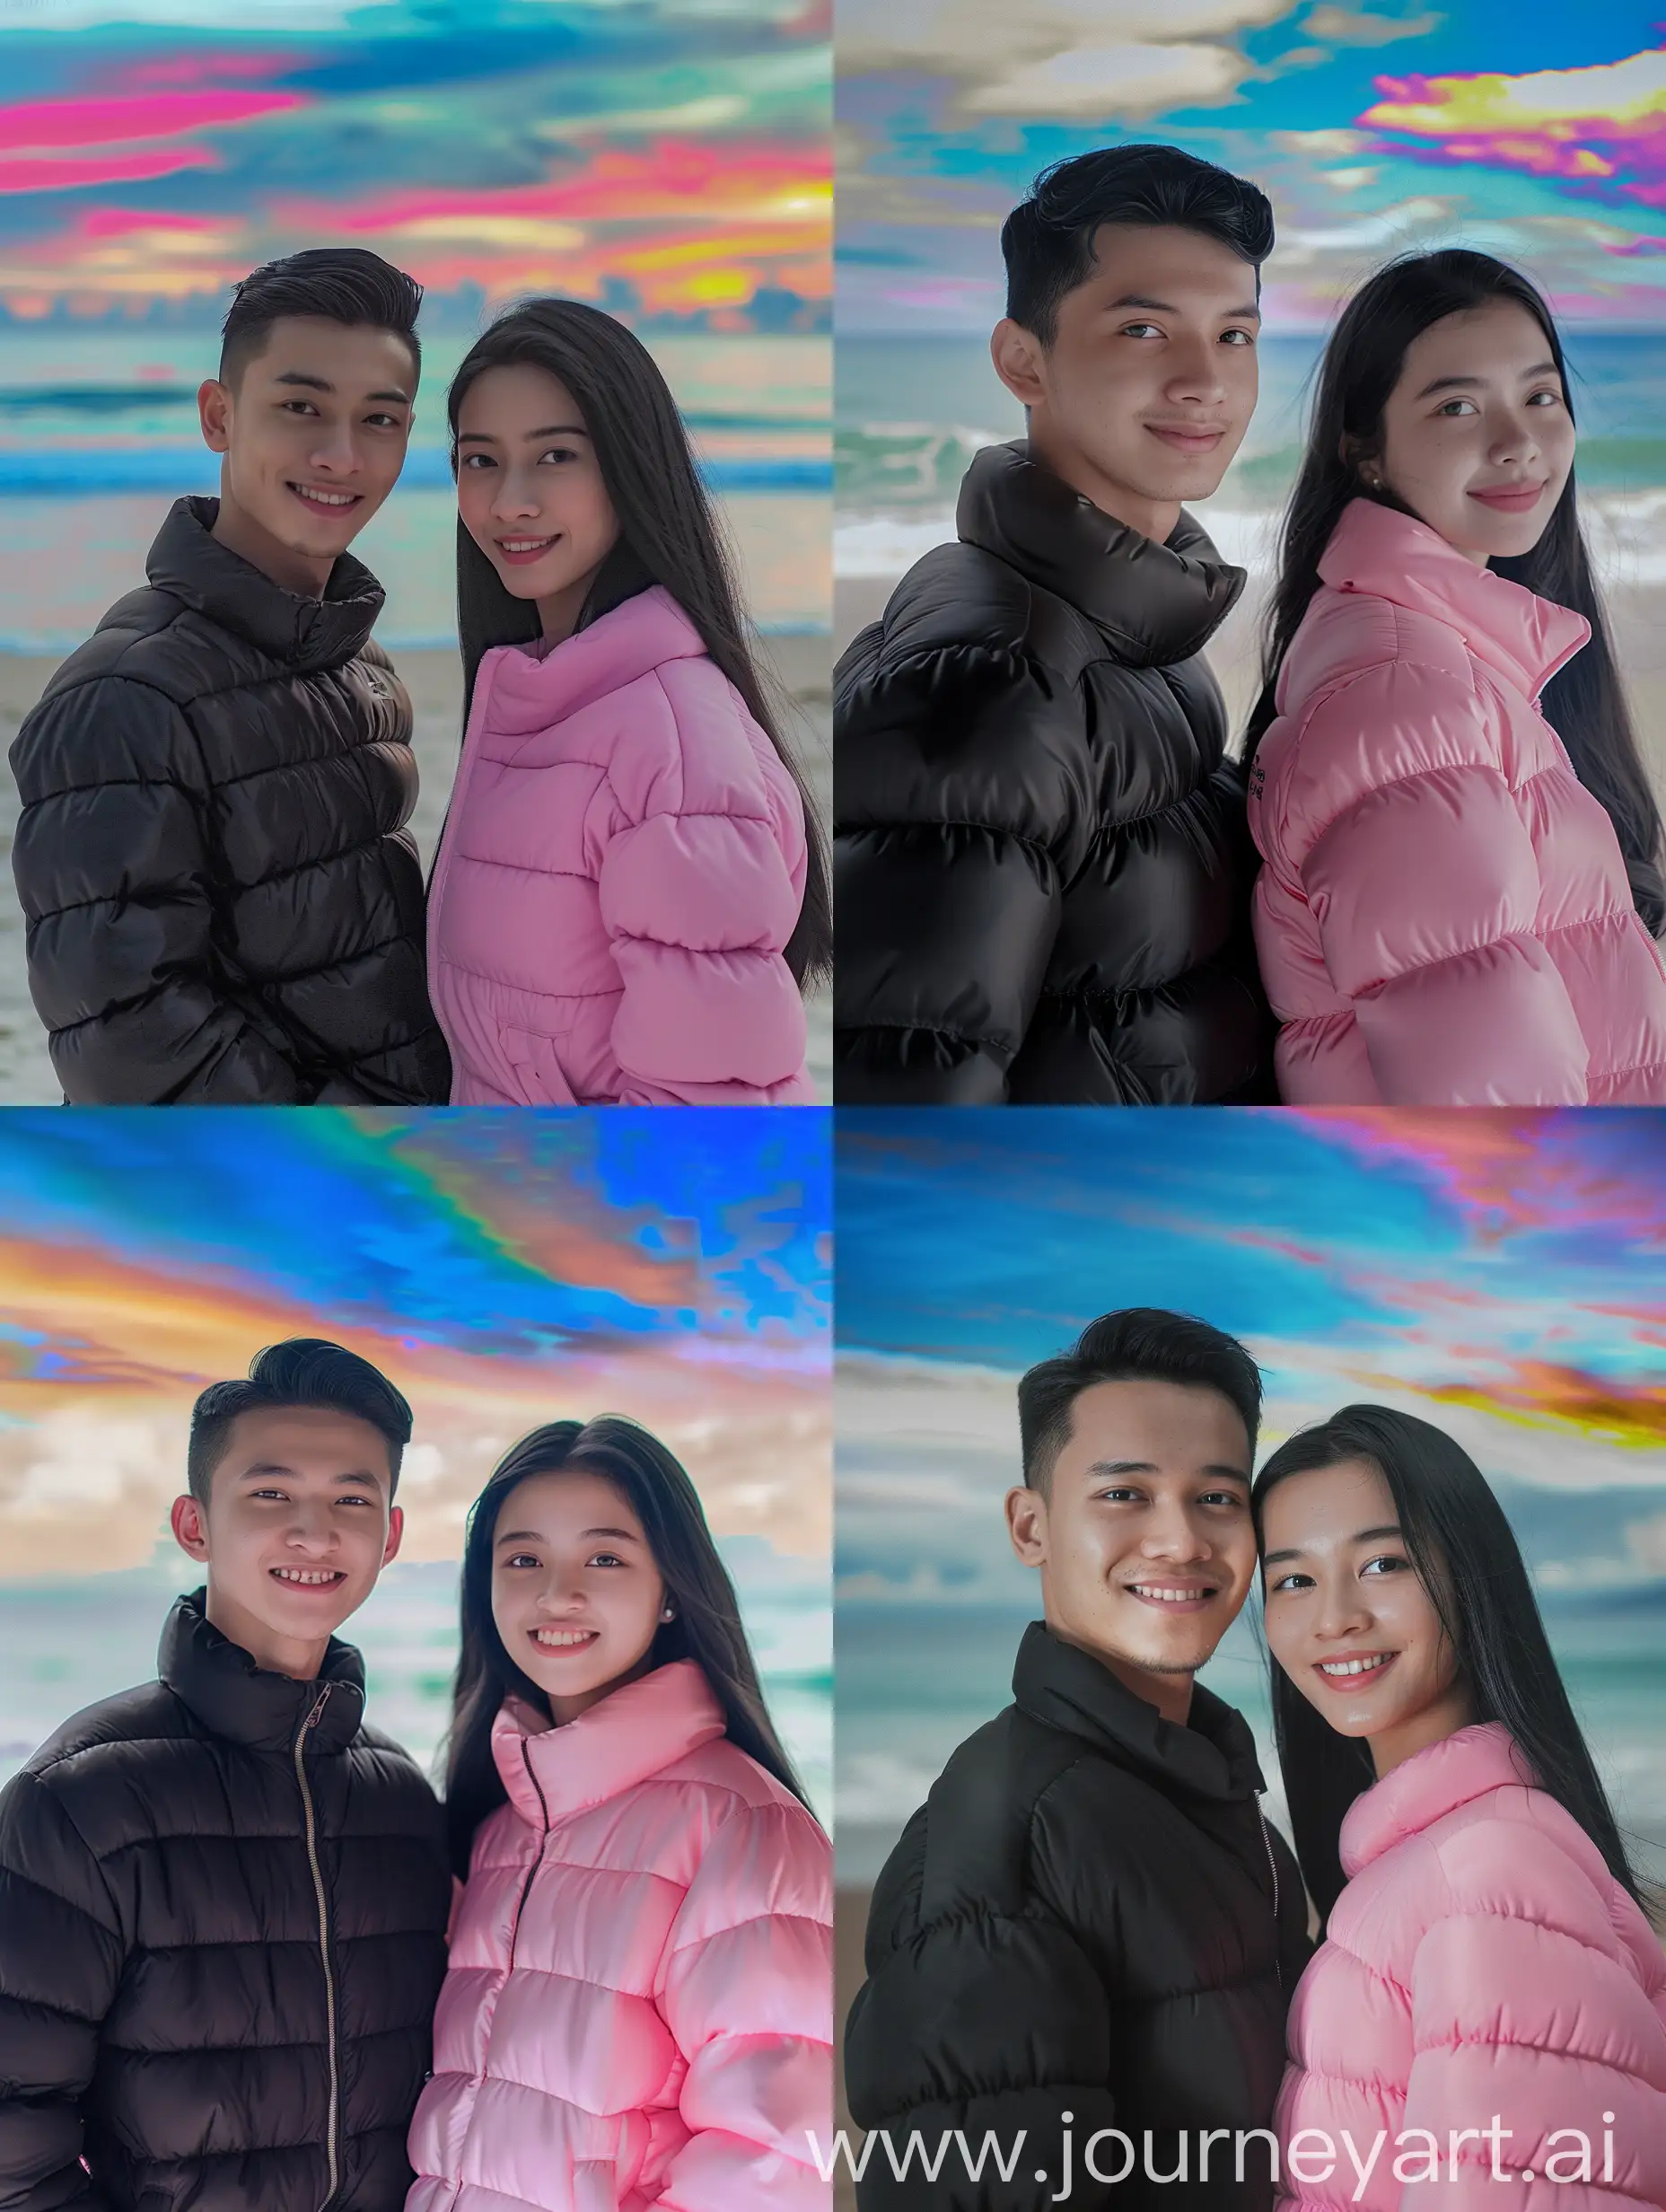 (8K, RAW Photo, Photography, Photorealistic, Realistic, Highest Quality, Intricate Detail), Medium photo of 25 year old Indonesian man, fit, ideal body, oval face, white skin, natural skin, cool short black hair, wearing a bubble jacket black, side by side with a 25 year old Indonesian woman with long black hair, pink bubble jacket, they are smiling facing the camera, their eyes are looking at the camera, the corners of their eyes are parallel to the view on the beach near the beach sand there is a blue sea with beautiful colored clouds in the half body photo